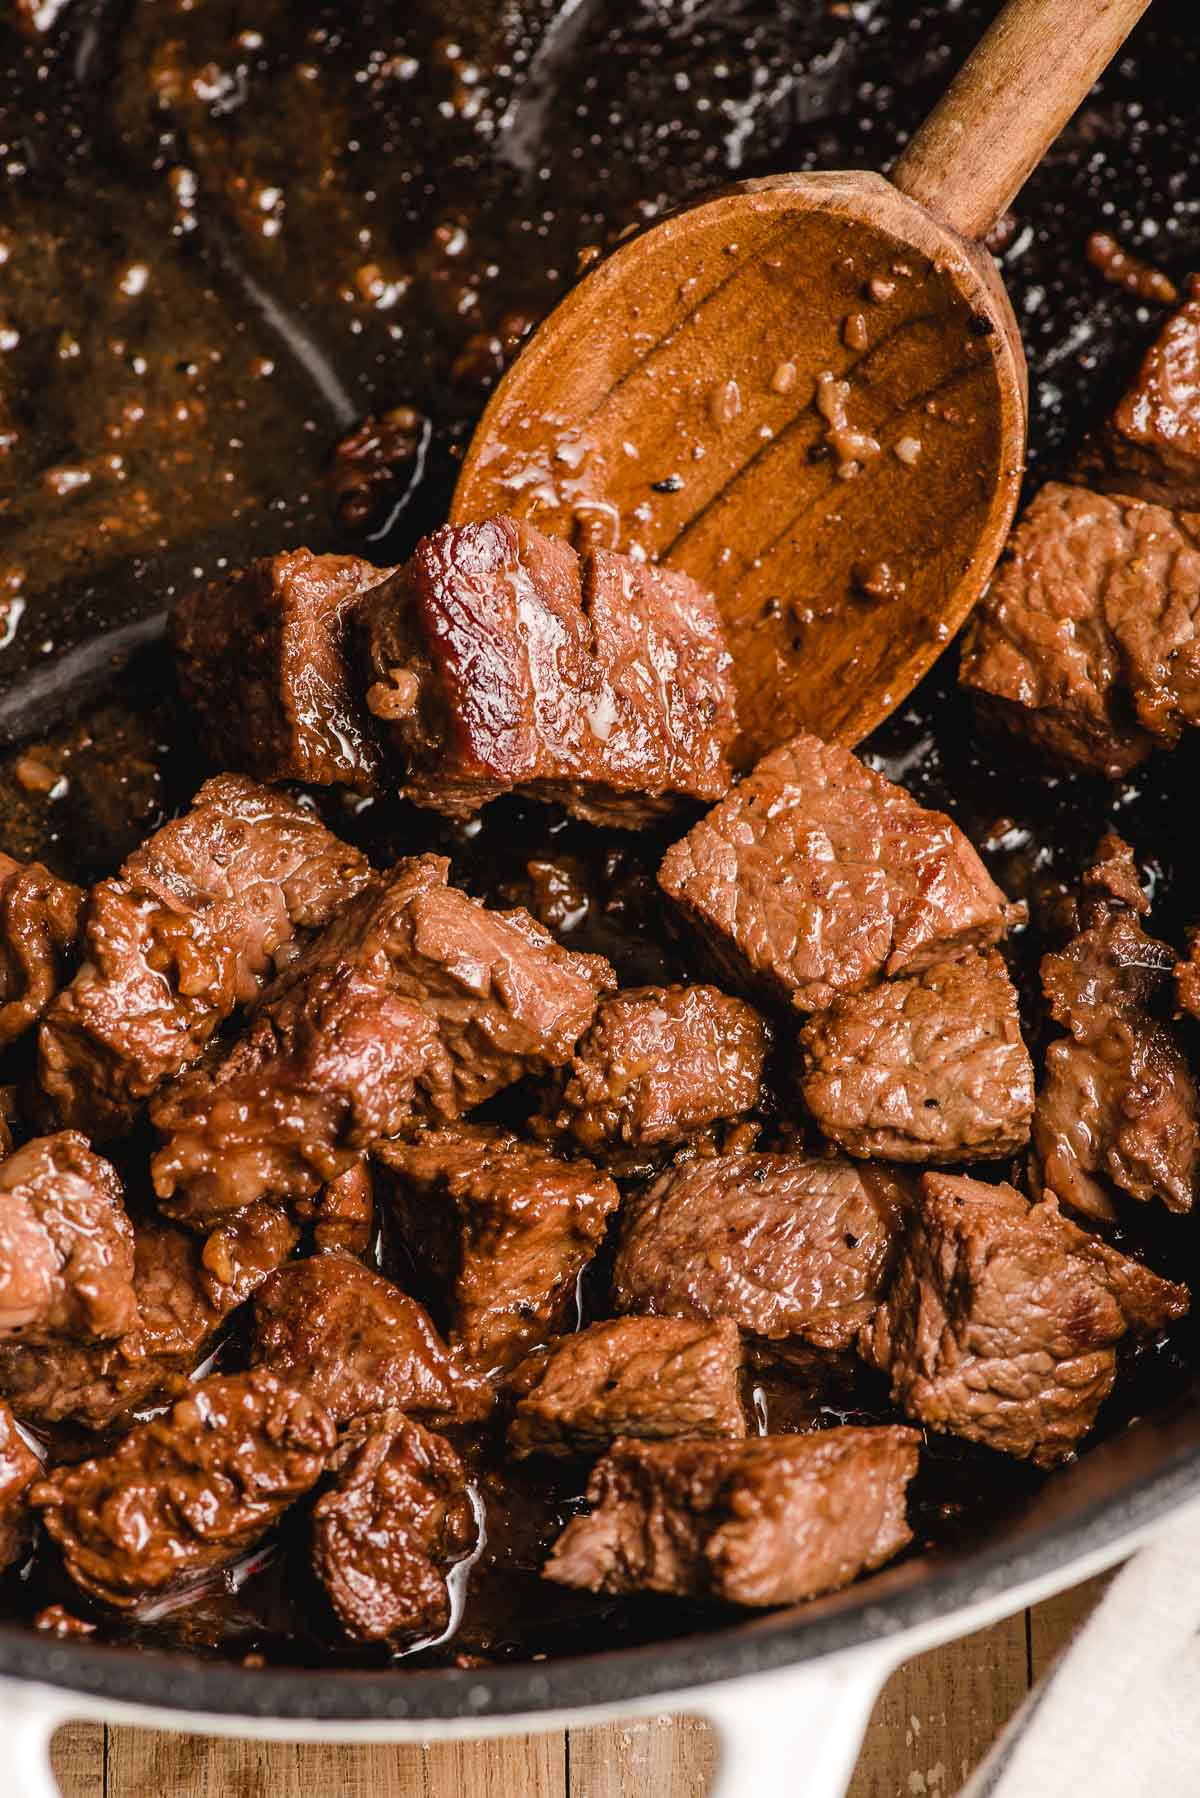 hibachi steak in a pan with a wooden spoon